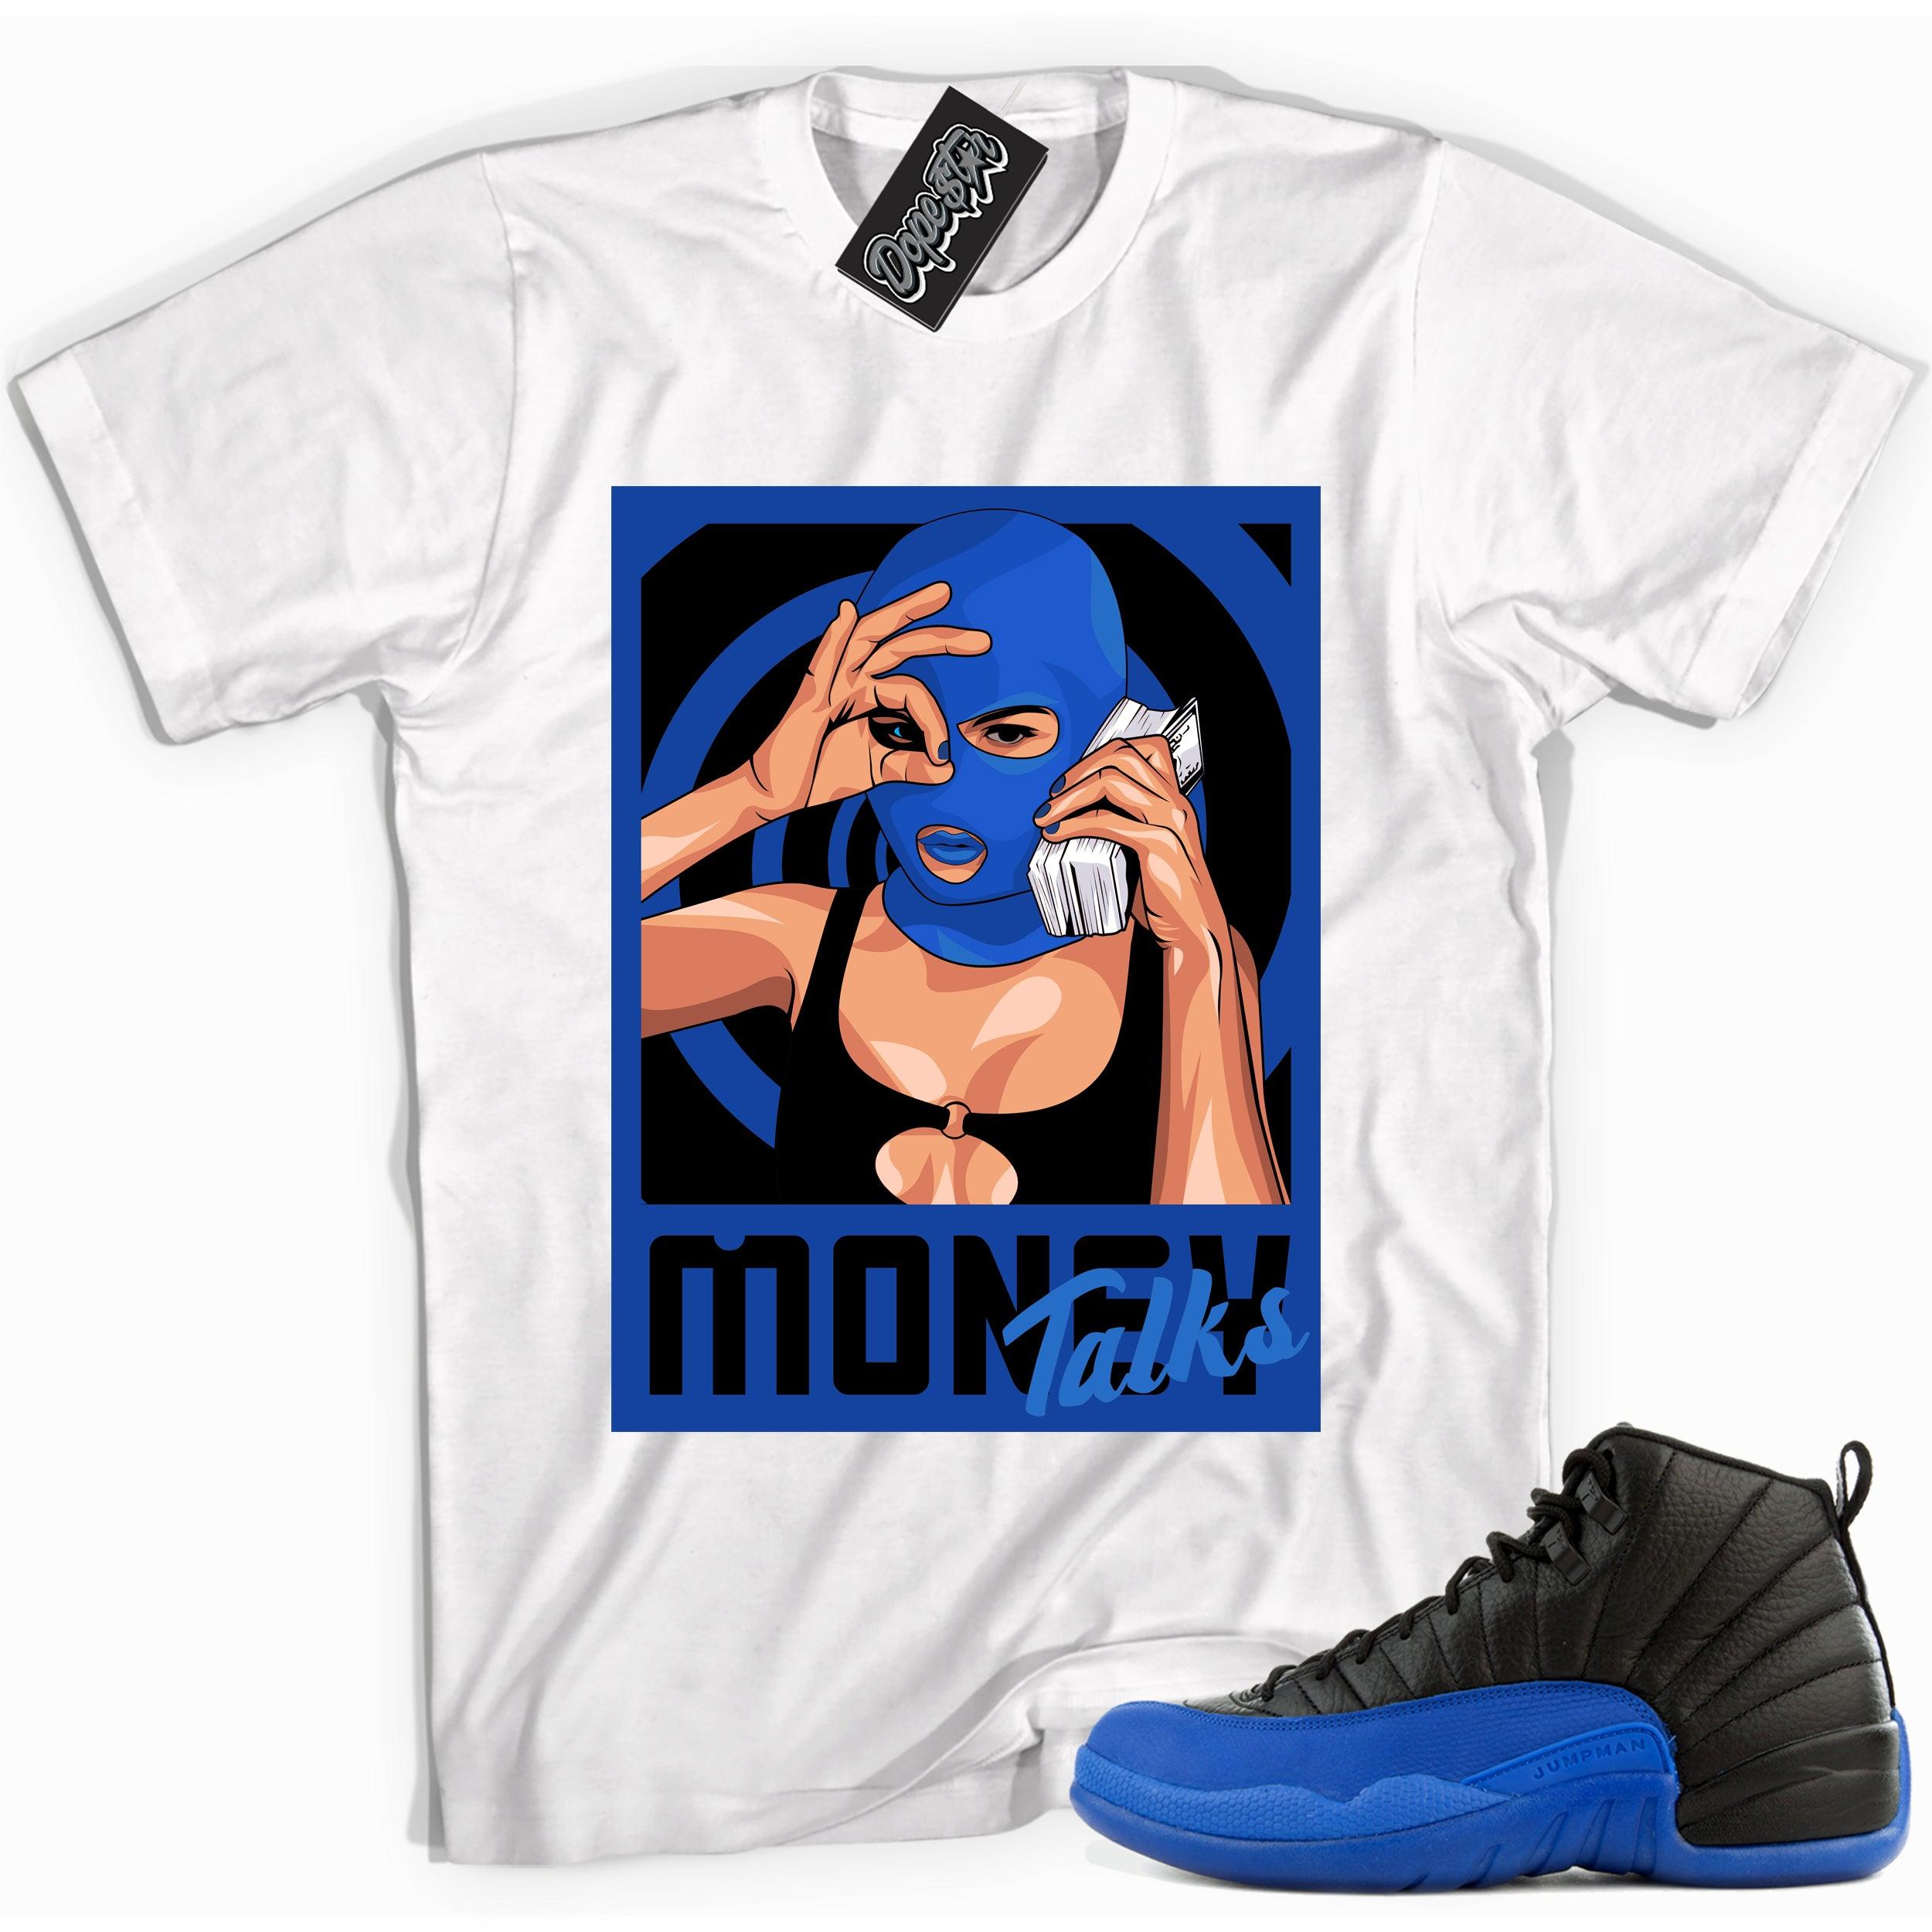 Cool white graphic tee with 'money talks' print, that perfectly matches Air Jordan 12 Retro Black Game Royal sneakers.